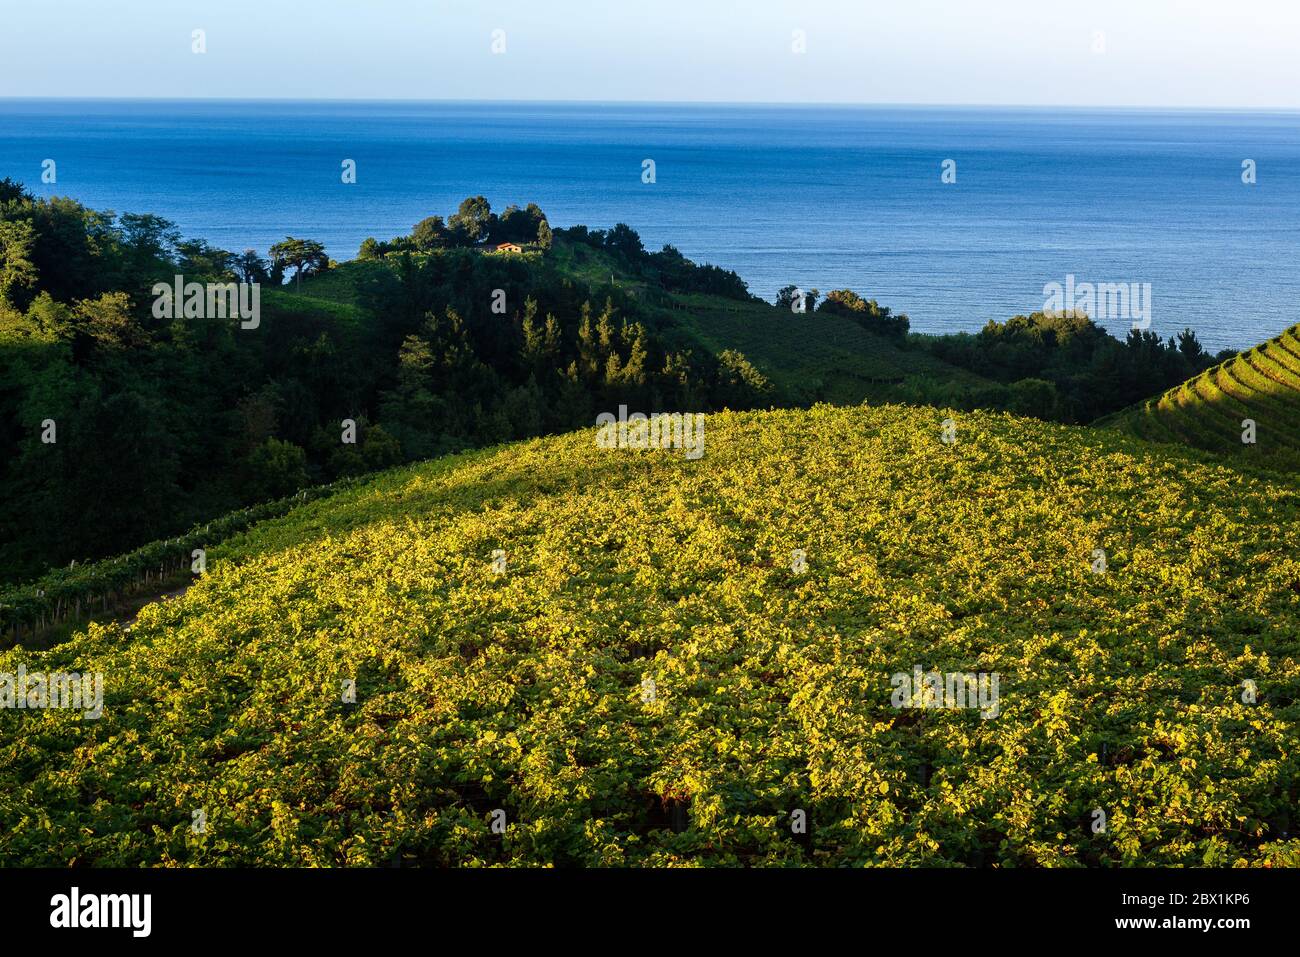 Txakoli white wine vineyards with the Cantabrian sea in the background, Getaria, Spain Stock Photo